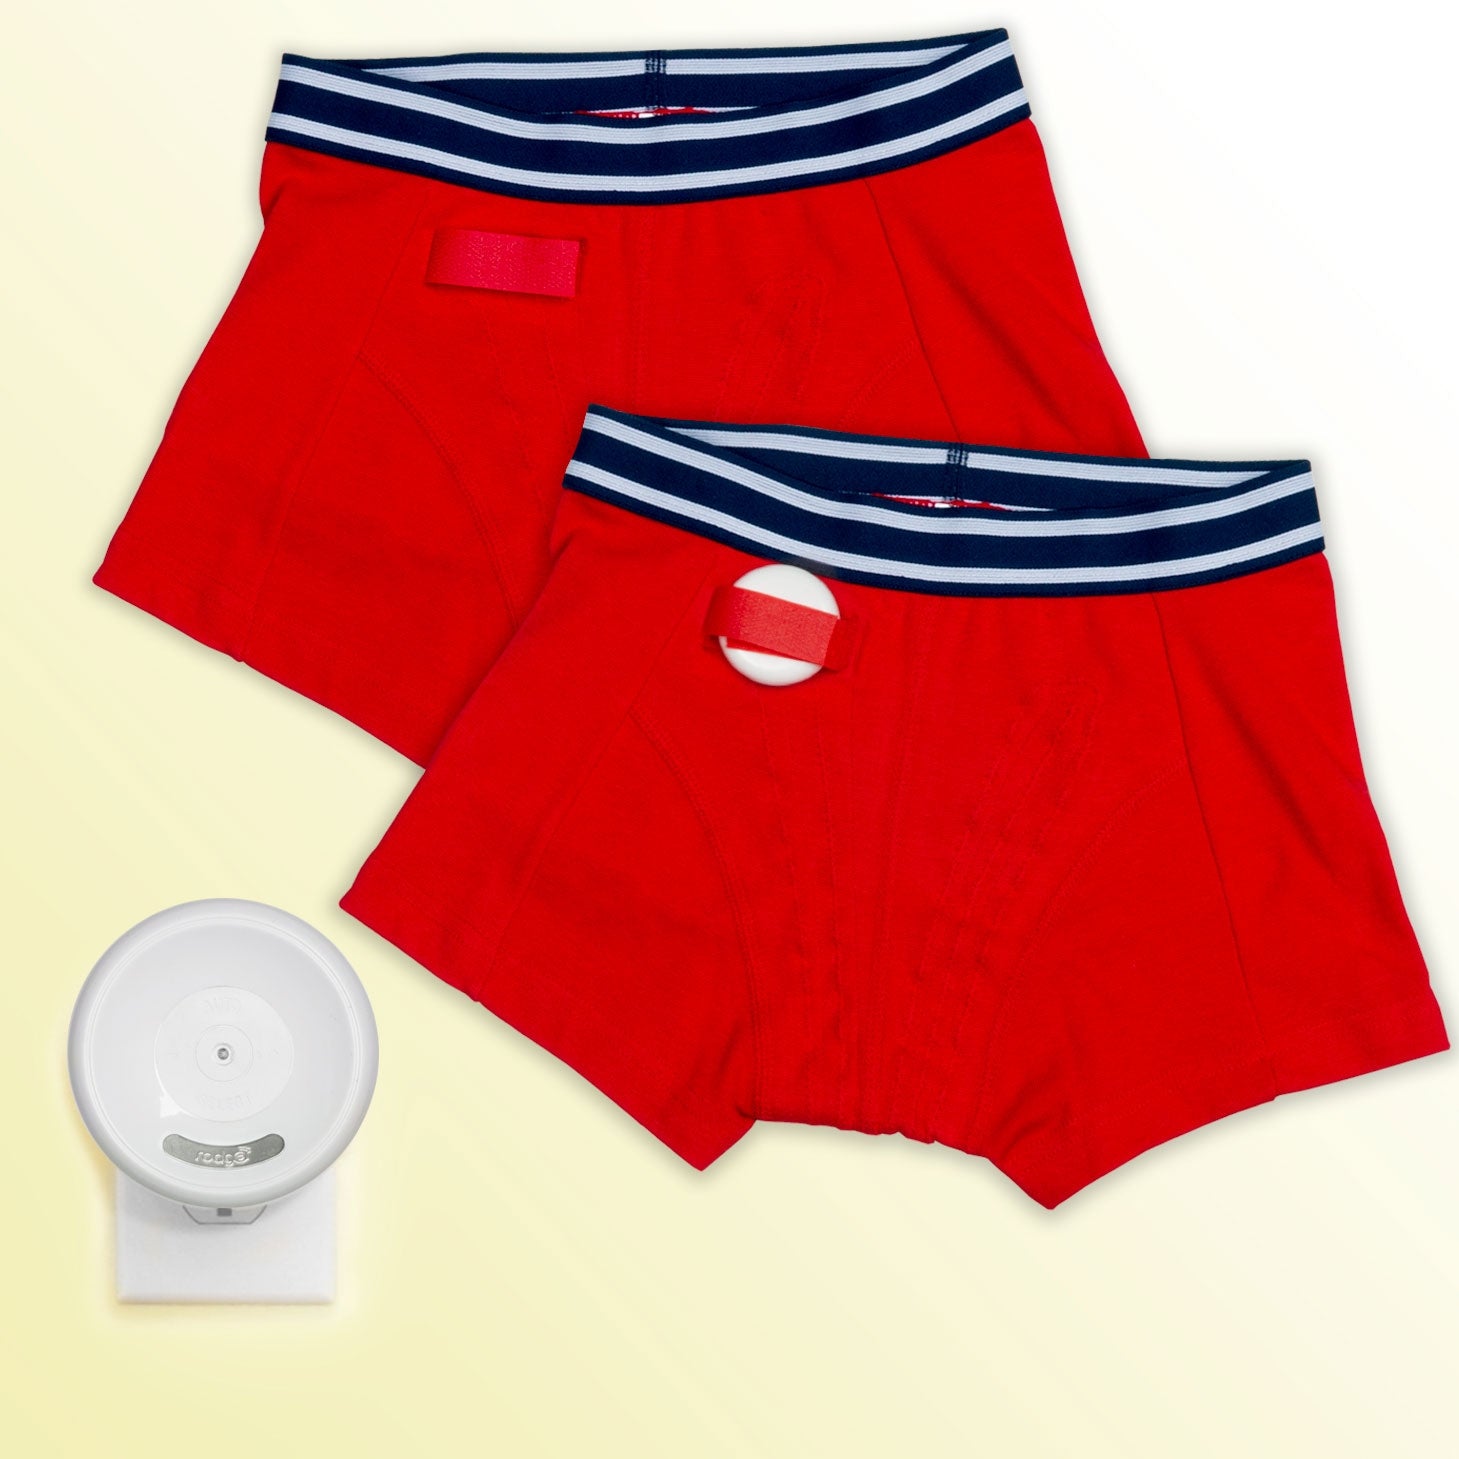 * Clearance * Rodger® Wireless Bedwetting Alarm System-Red Briefs only